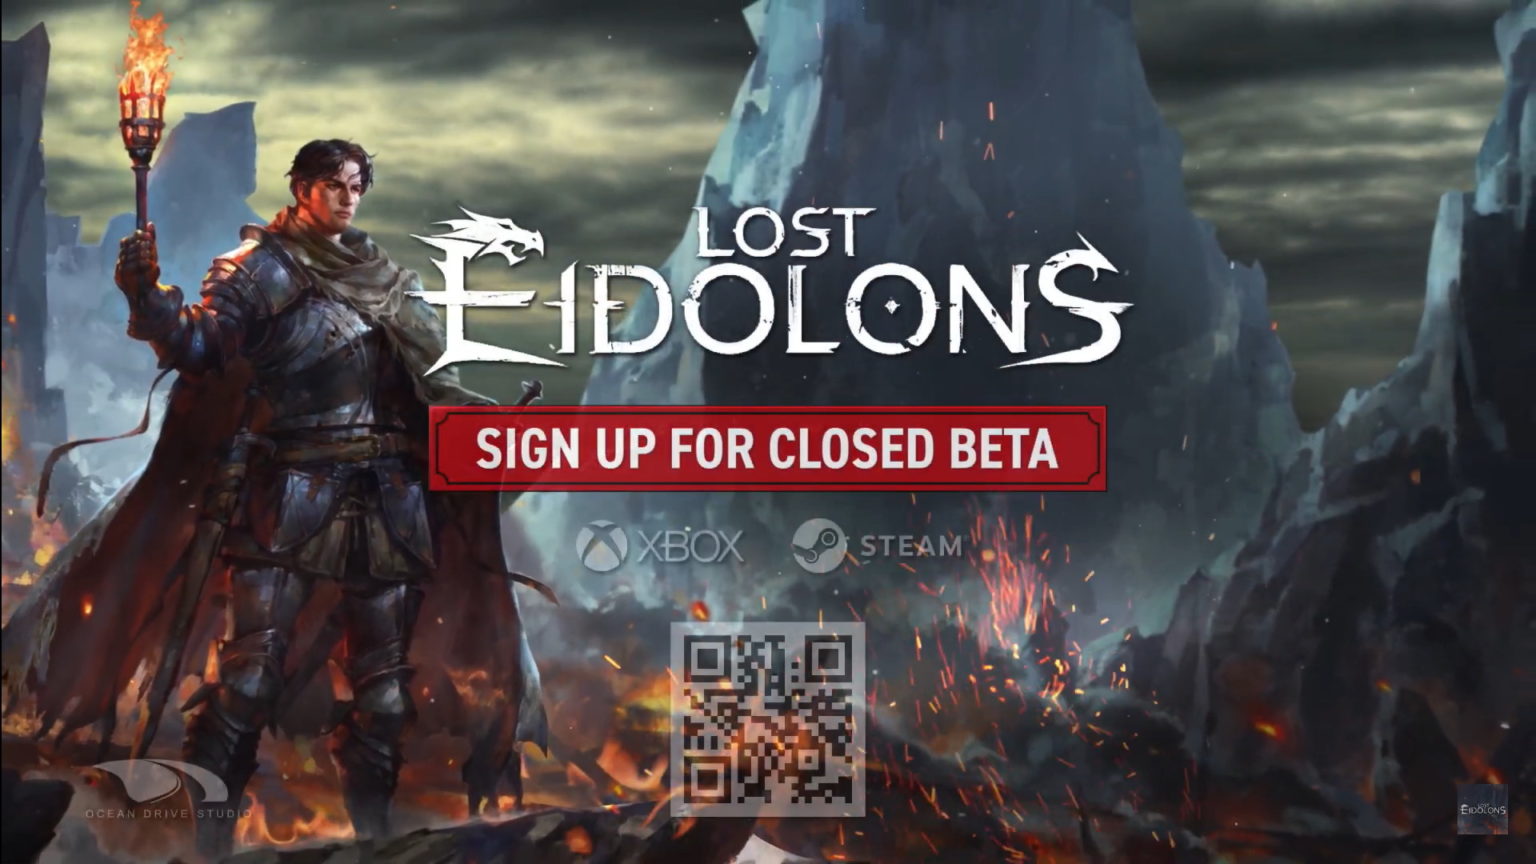 Lost Eidolons for windows download free